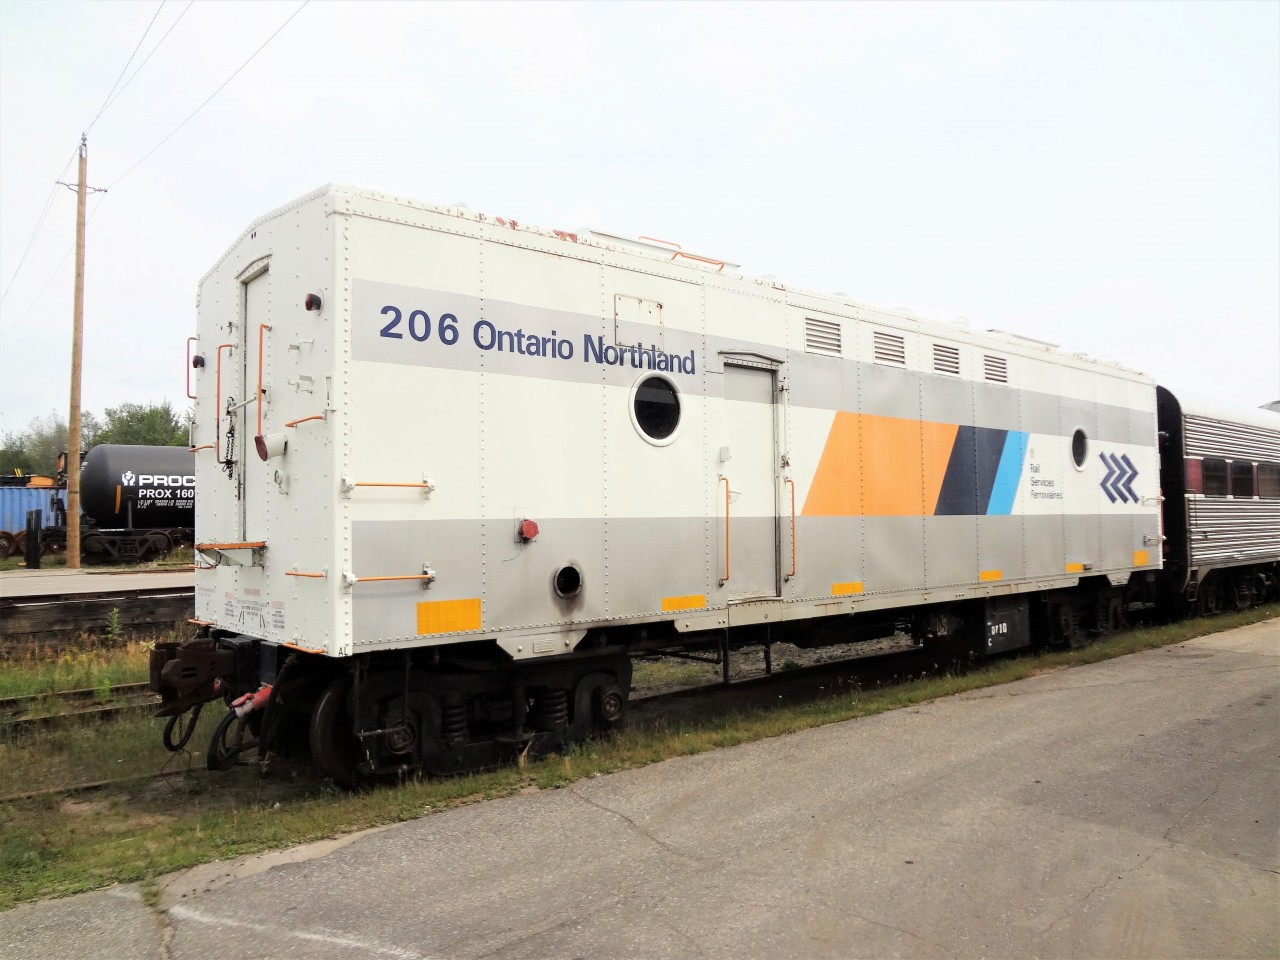 ONT 206 (ex-BCOL 159, exx-VIA 15483, exxx-CN 15483) sits in line with several other pieces of passenger equipment after being prep'd for a trip to a western Canada museum destination. Taken during a work related visit to Ontario Northland facilities in North Bay, ON September 2, 2015.